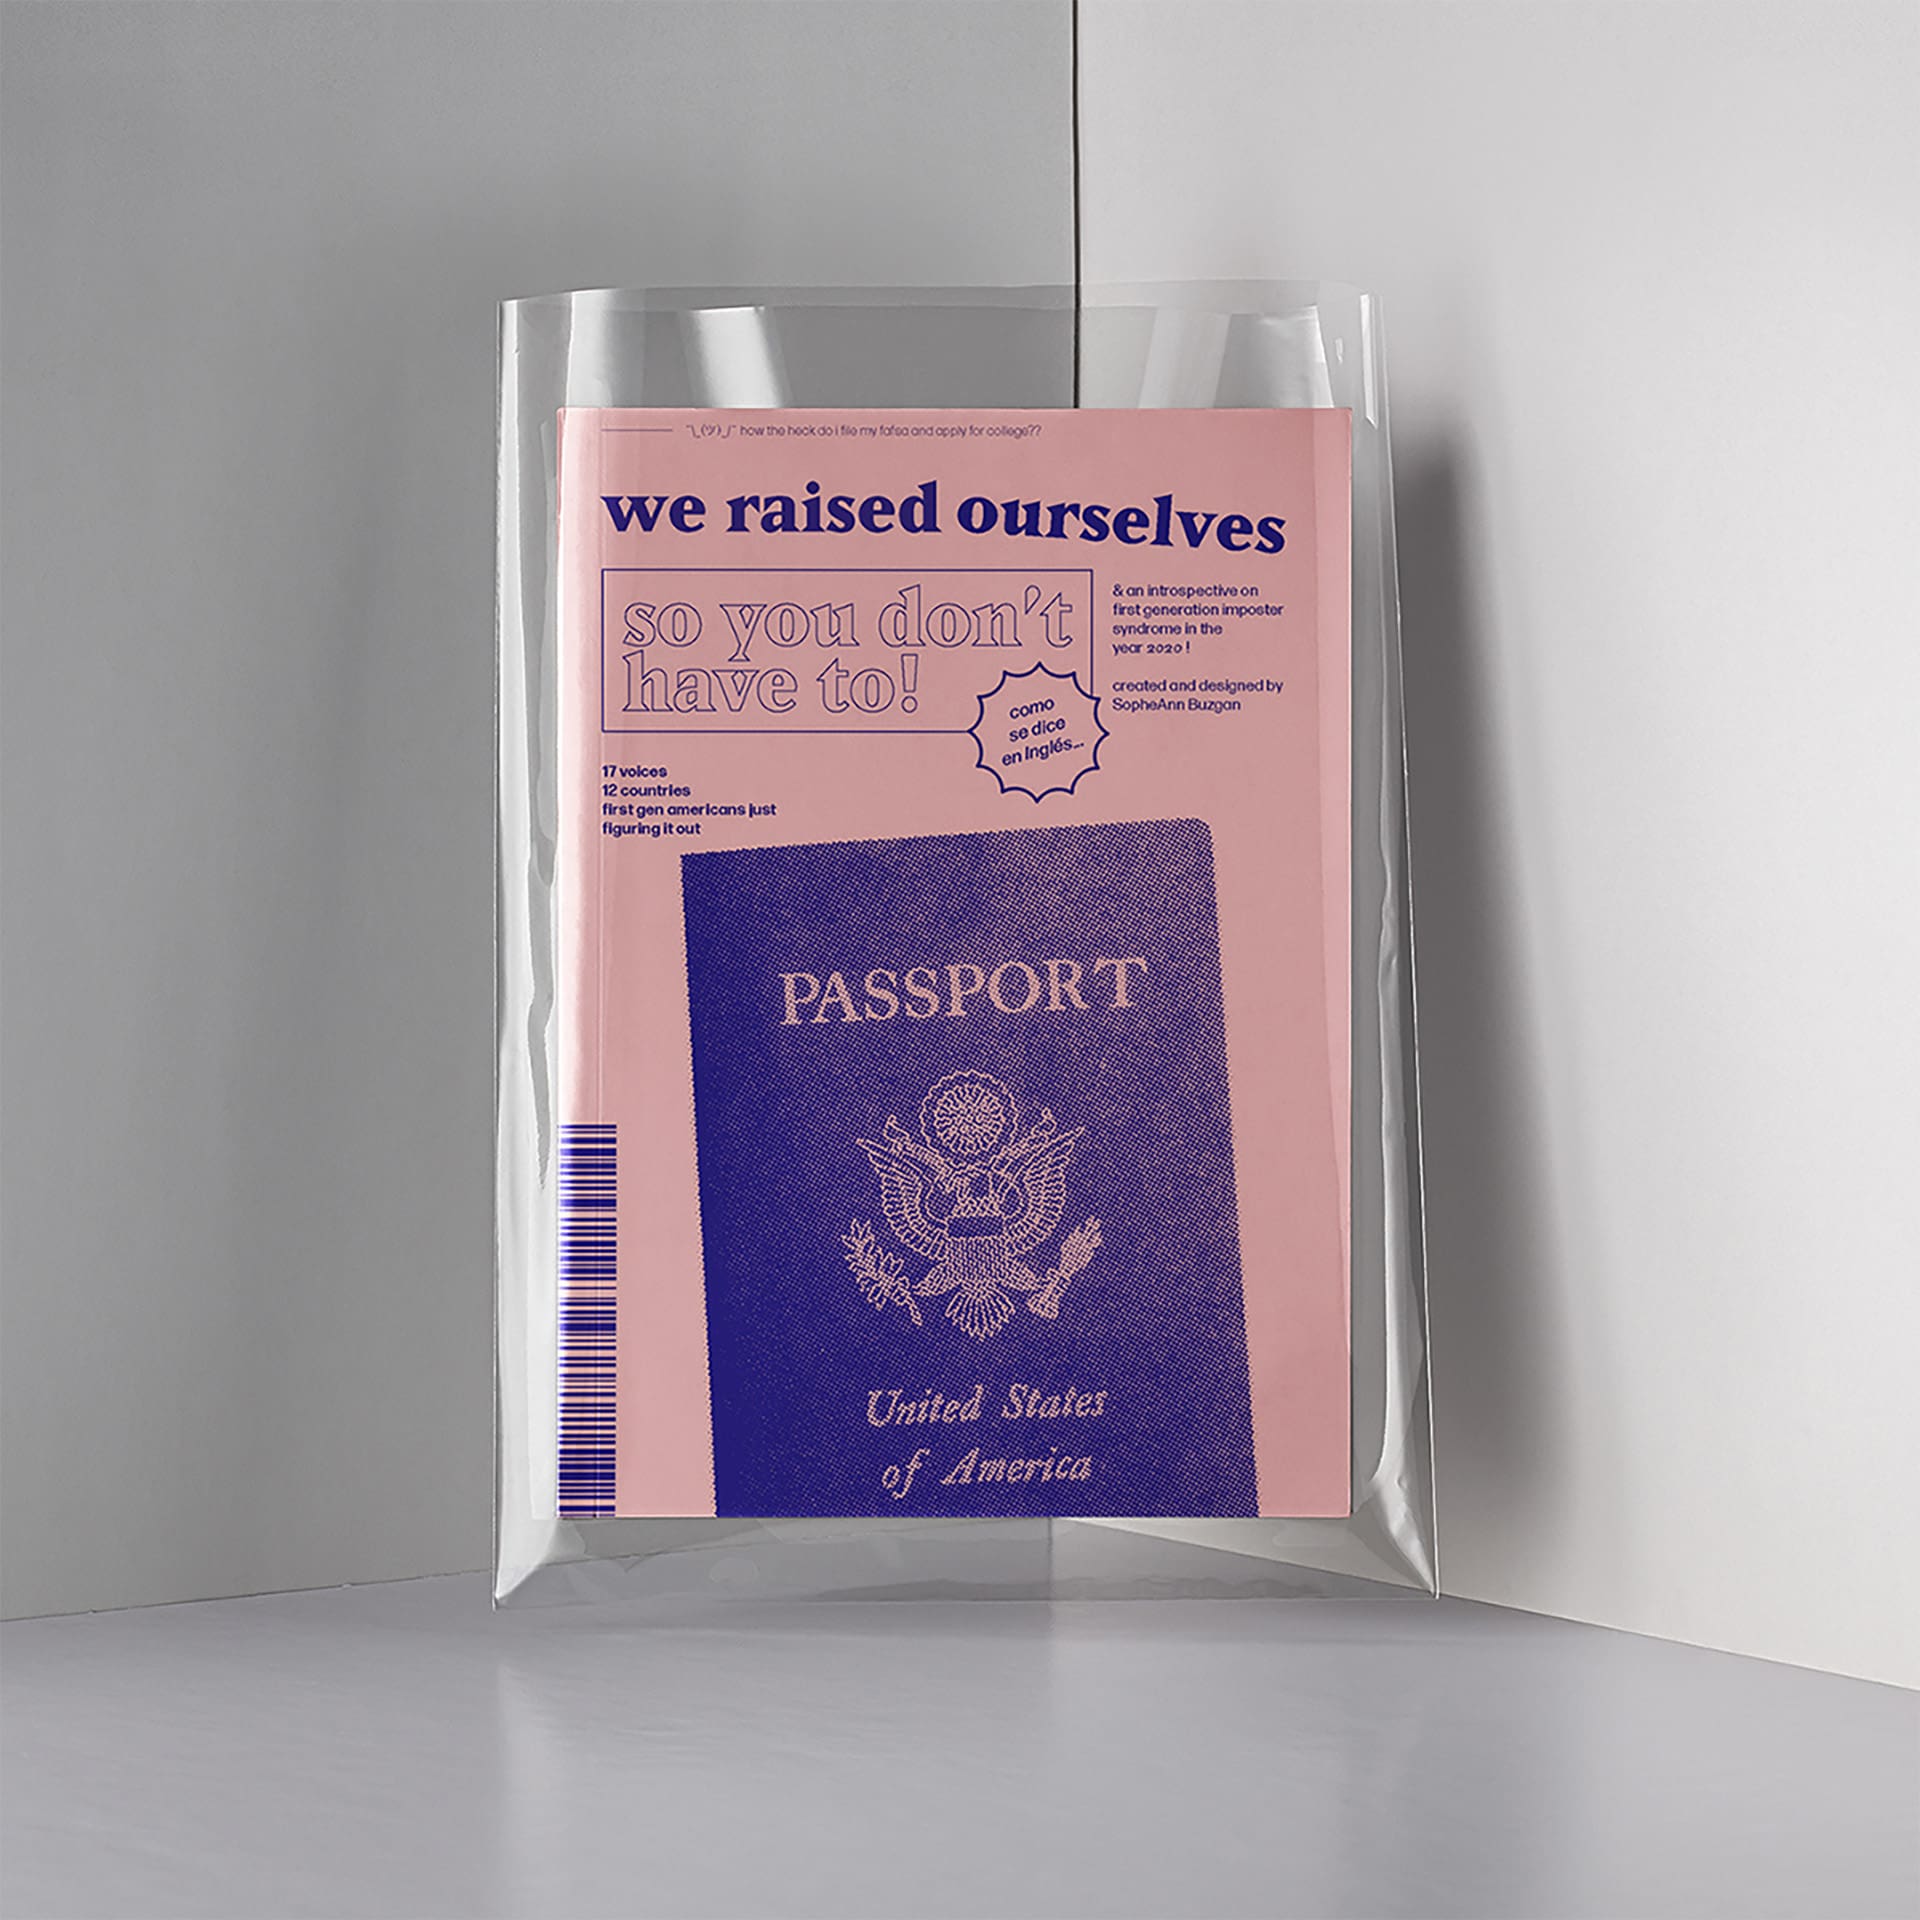 Risographed zine about imposter syndrome of first generation Americans. Shows a pink pamphlet with blue ink in a plastic baggie. The title reads "We Raised Ourselves, So You Don't Have To!" and below is an image of an American passport.